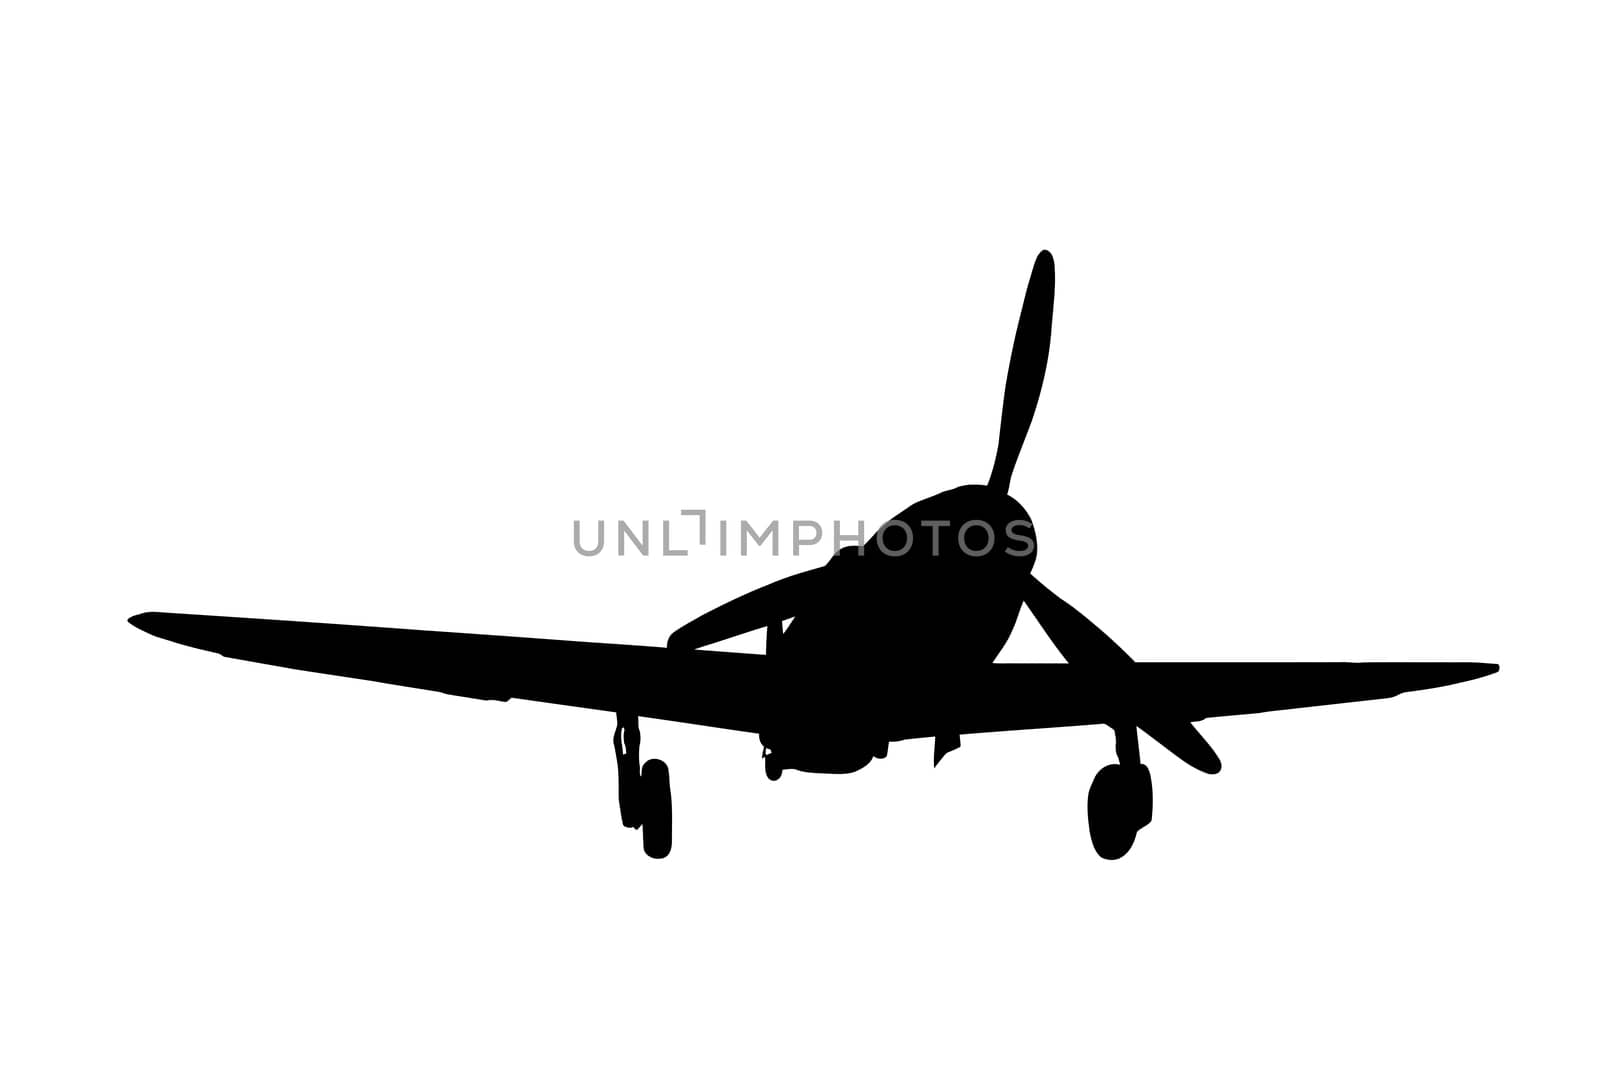 Silhouette of an airplane isolated on white background.